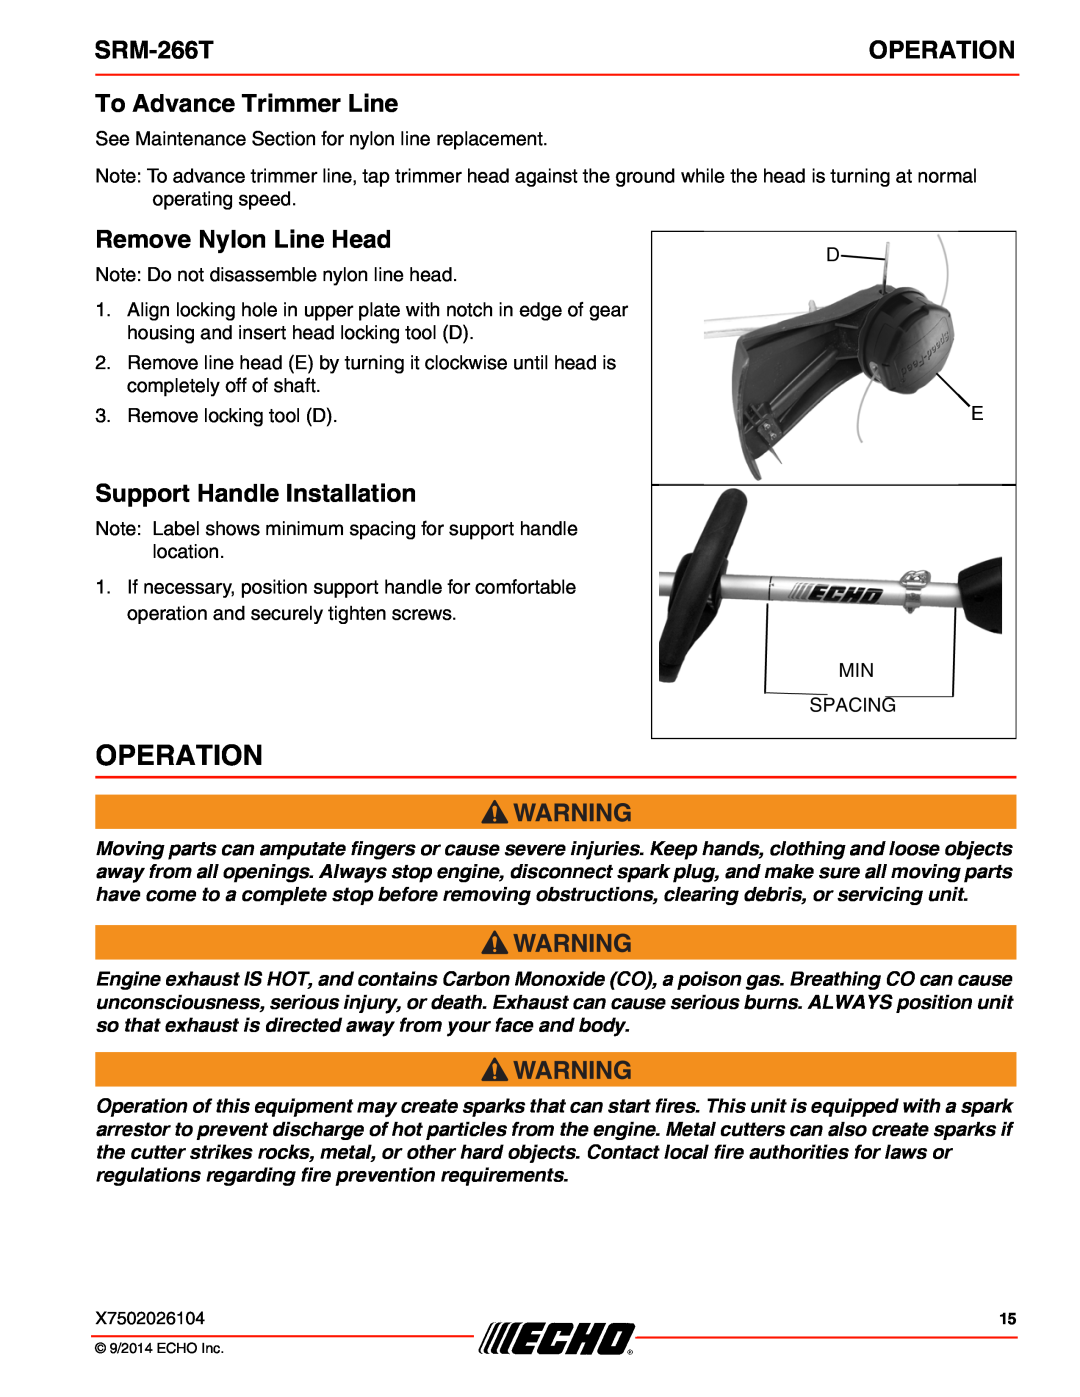 Echo SRM-266T specifications Operation, To Advance Trimmer Line, Remove Nylon Line Head, Support Handle Installation 